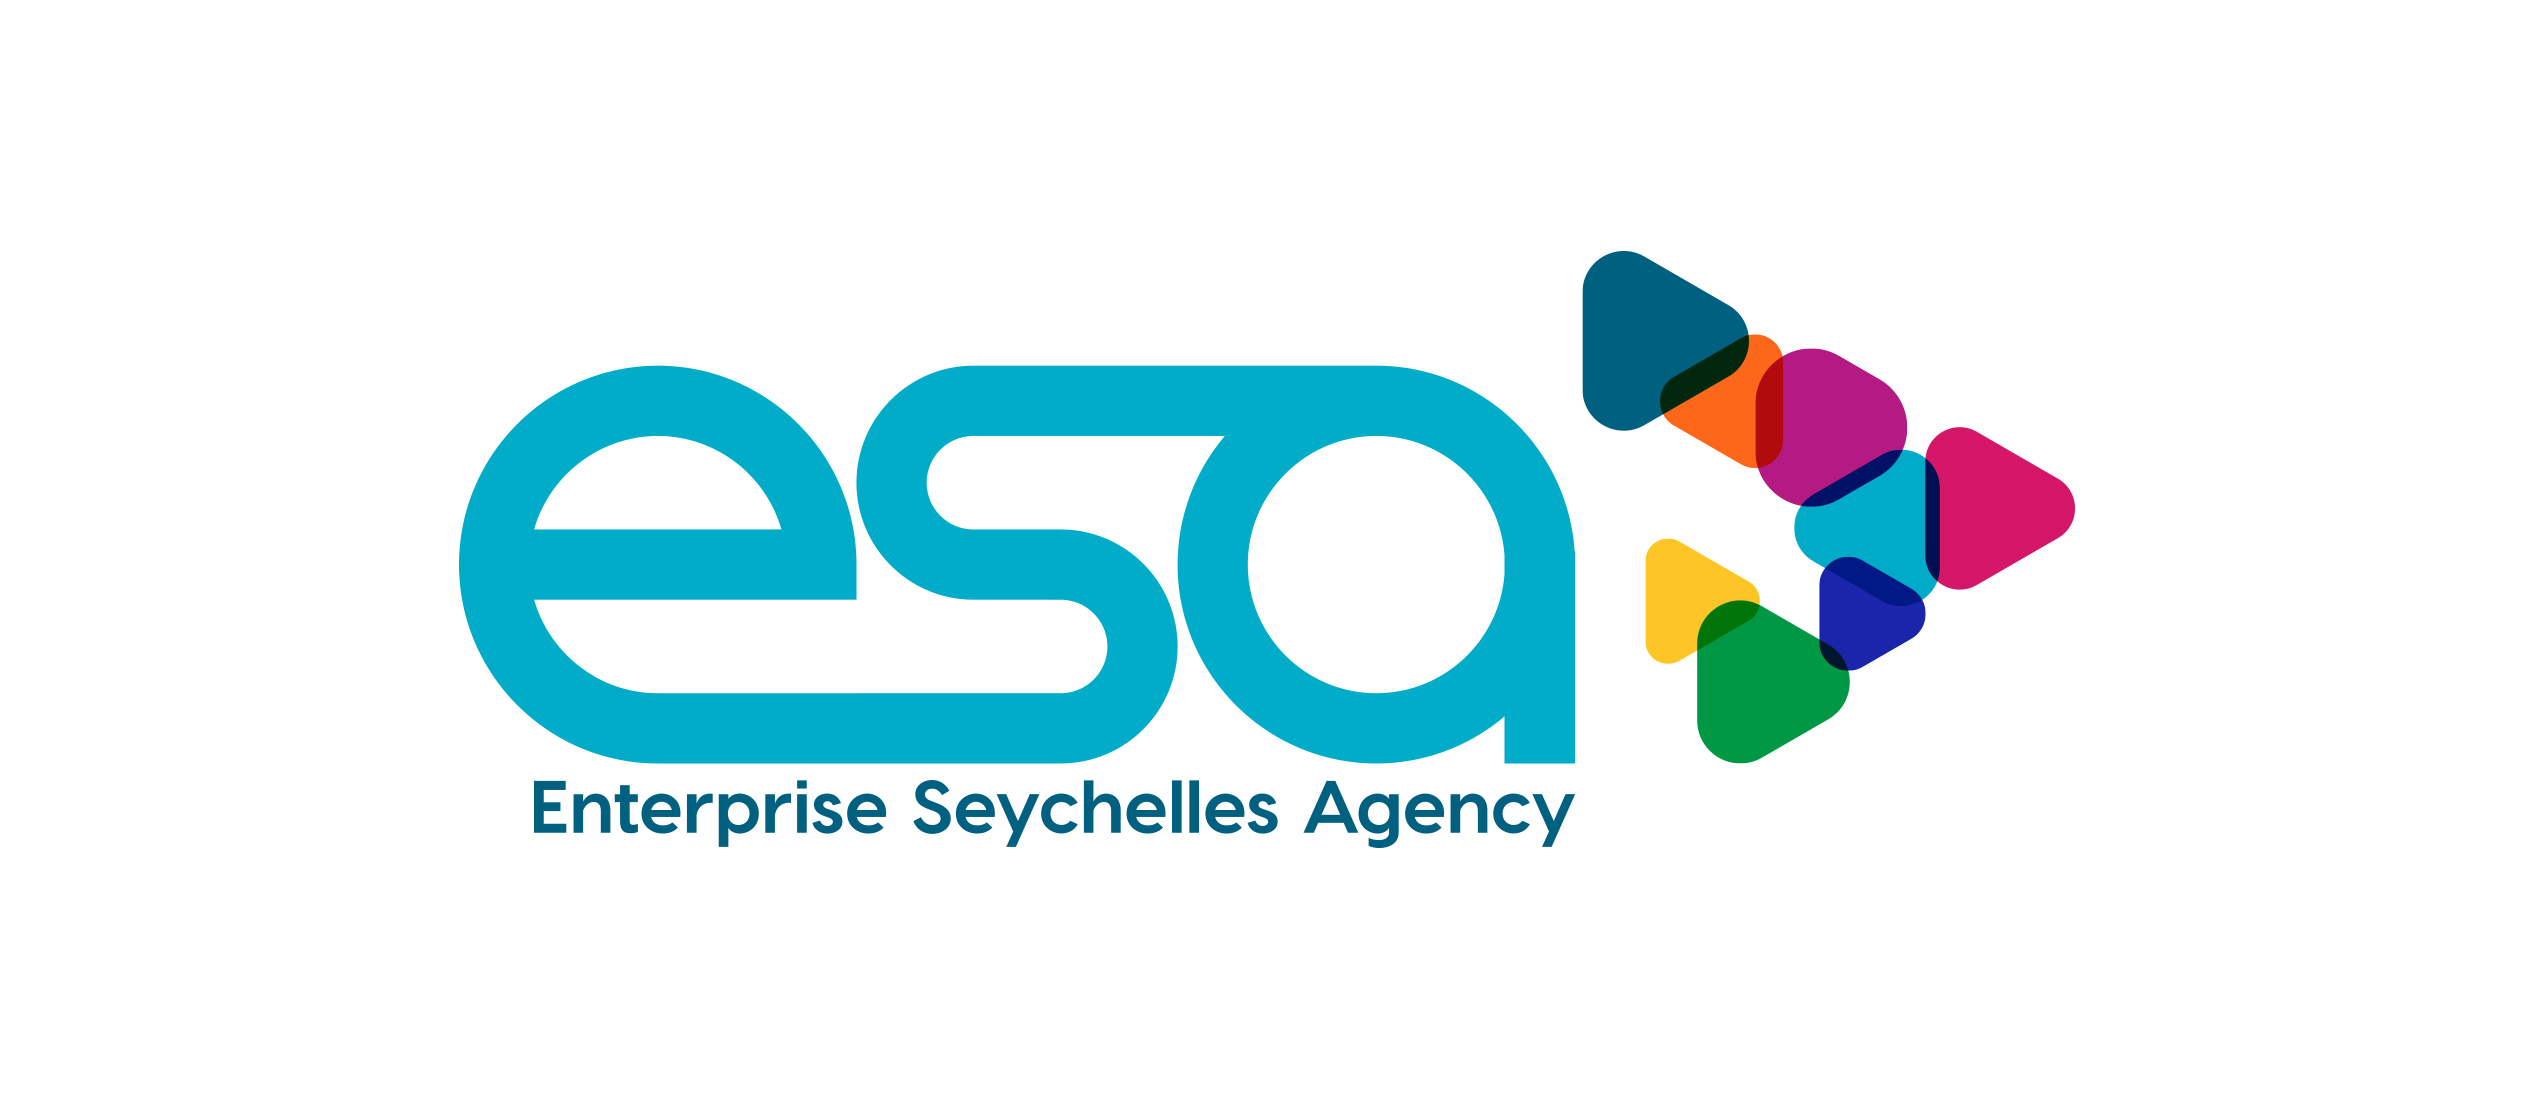 Official launching of ESA